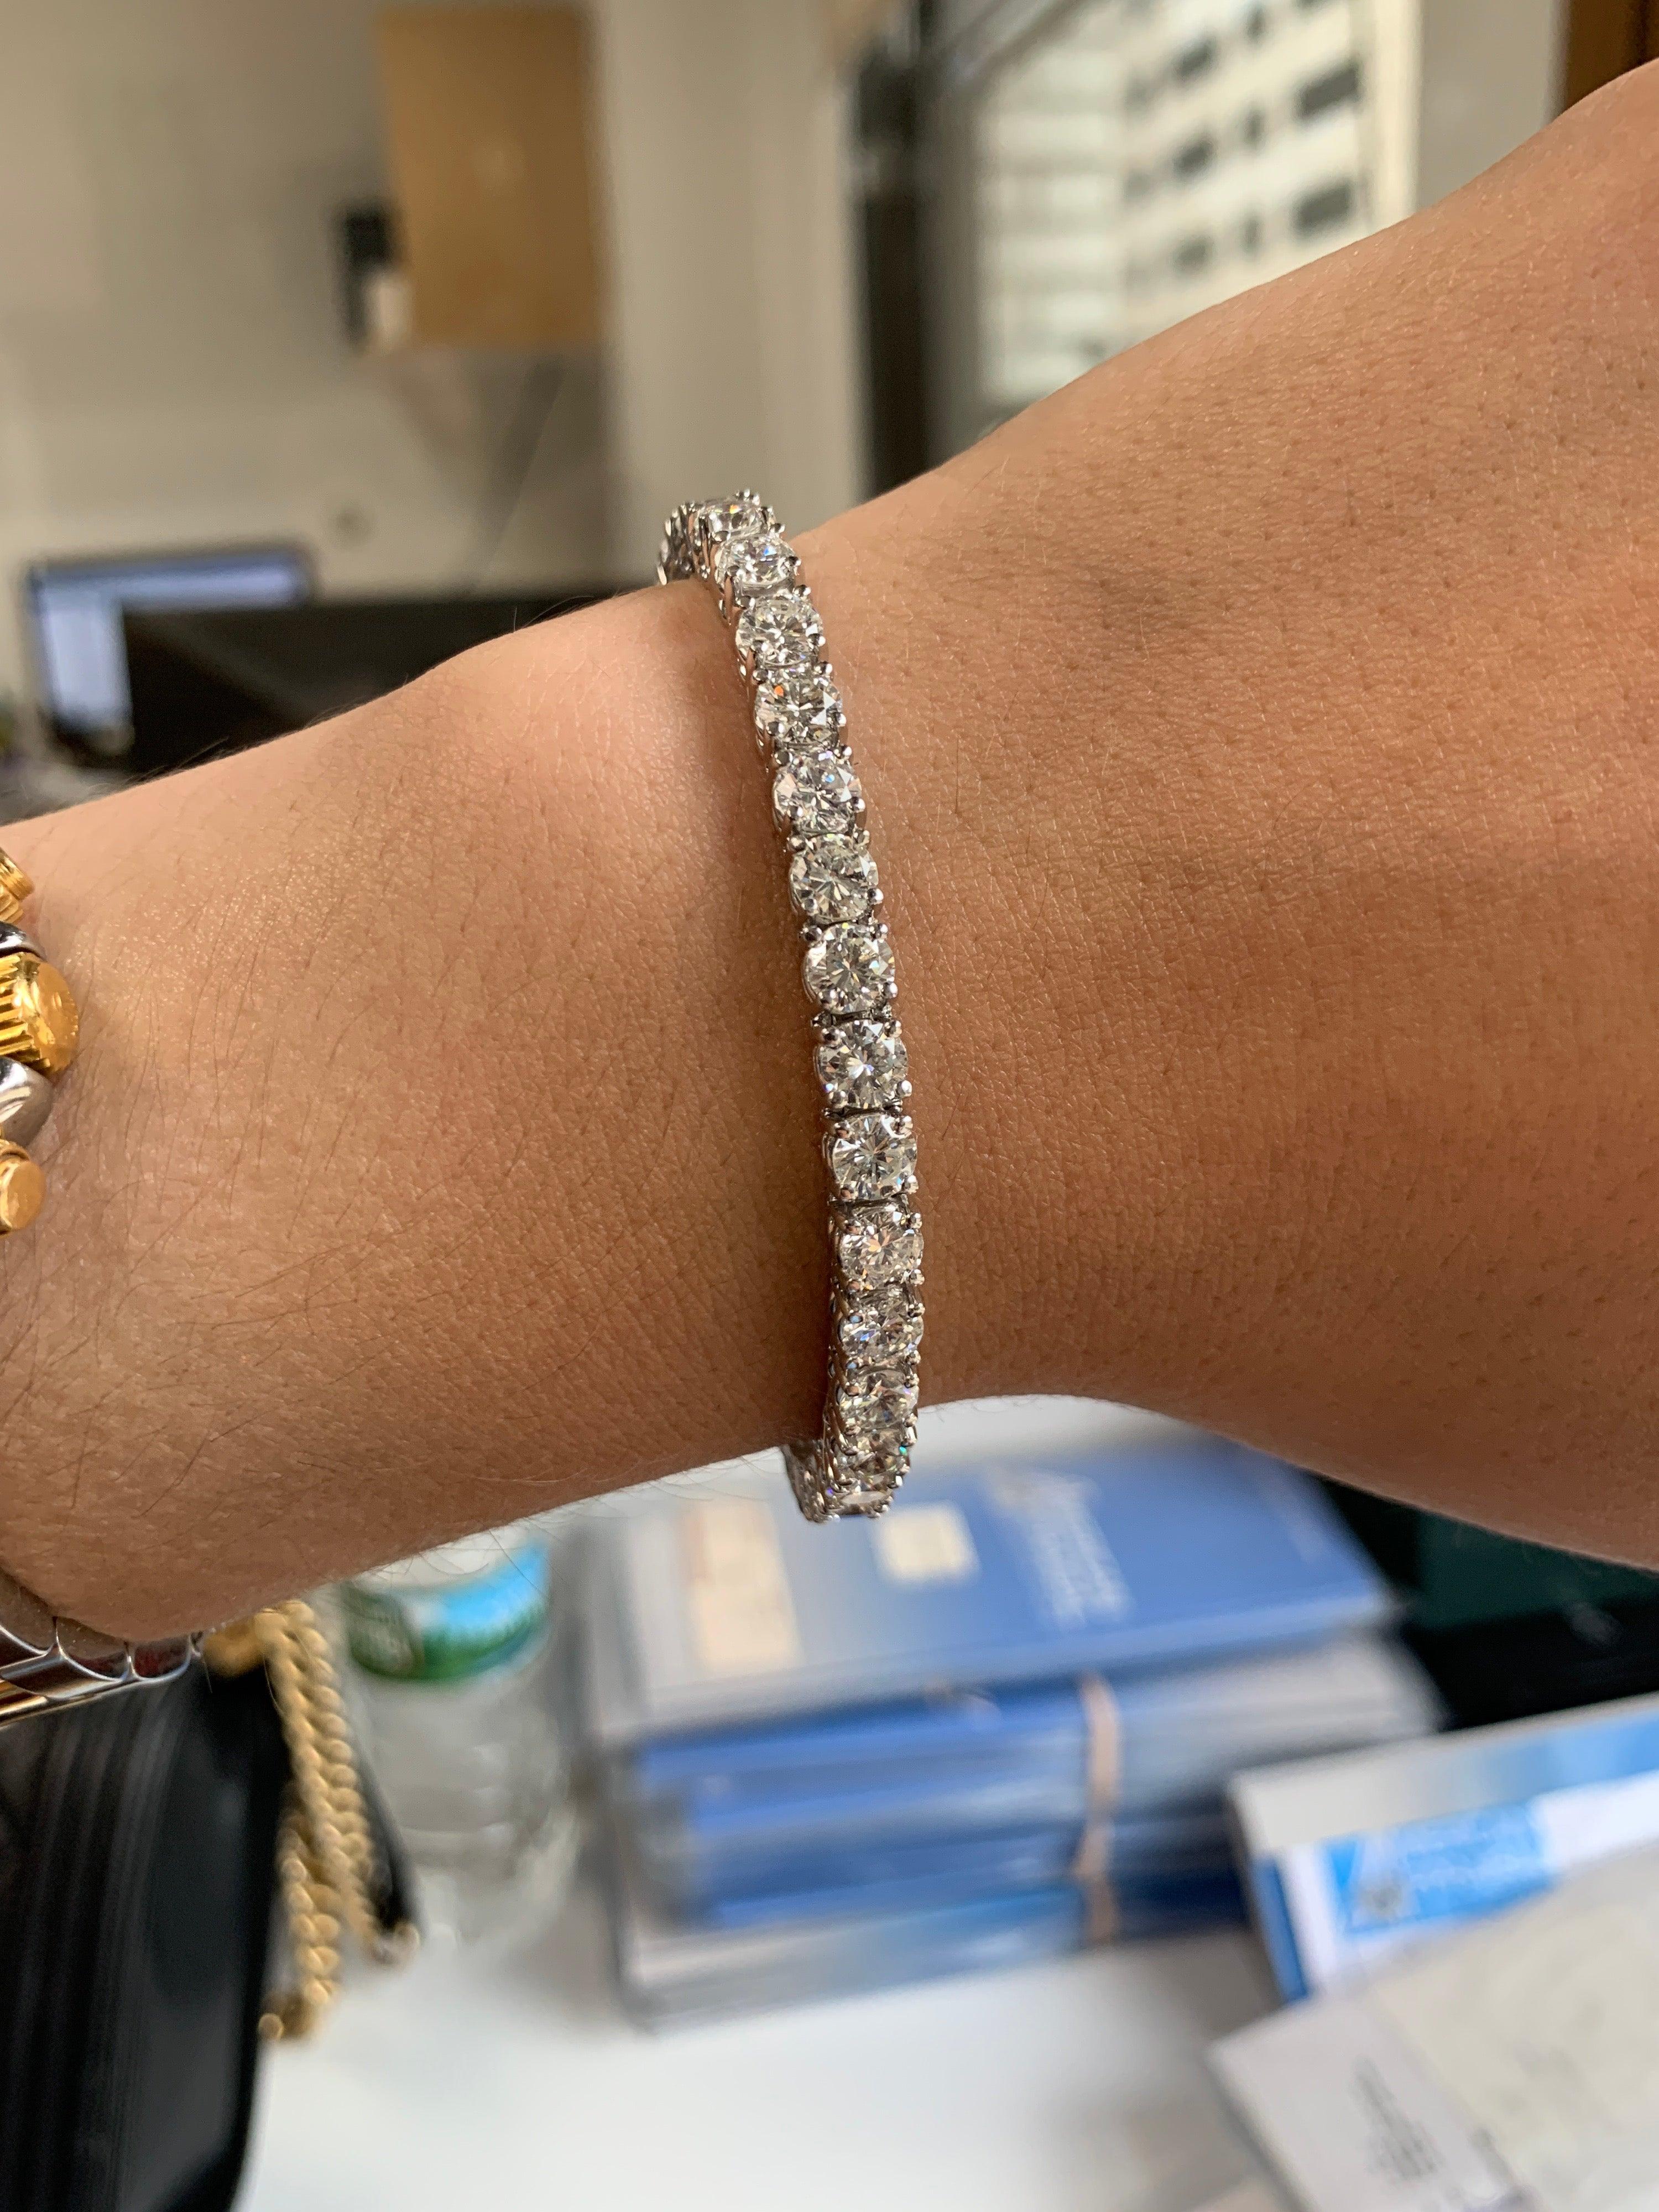 This important diamond tennis bracelet features 16.73 Carats of round brilliant cut diamonds. Each stone is approximately 0.50 Carats. 33 stones in total. Ideal cut diamonds 

Each stone is top color and clarity. G-H in Color

Every Woman Should